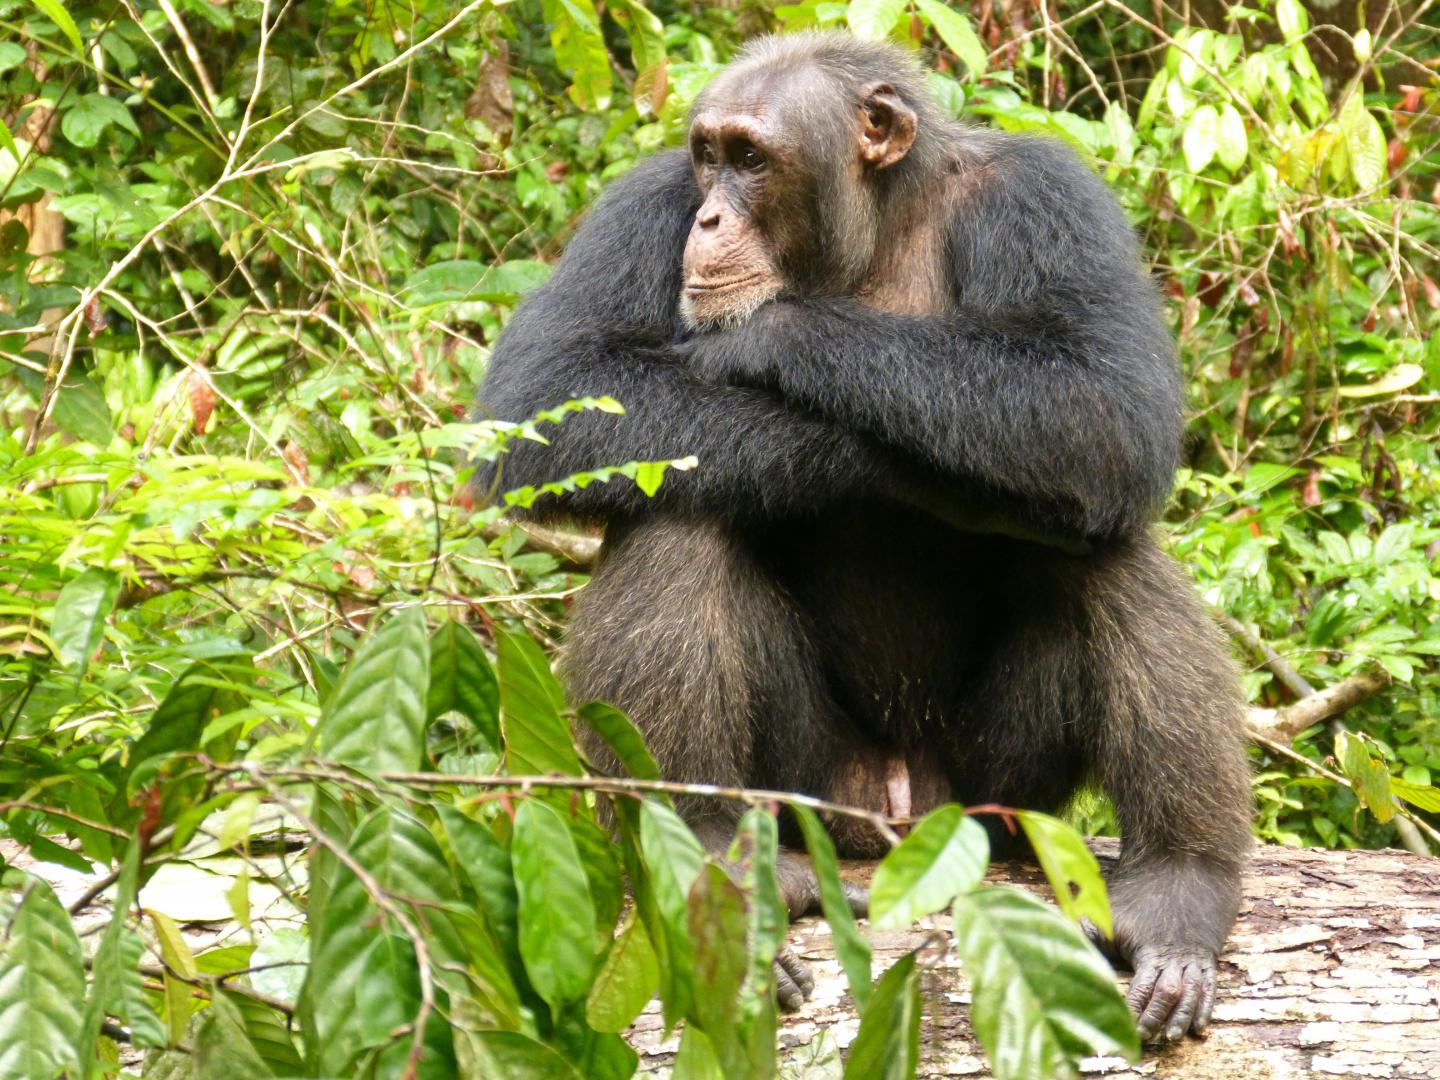 New Study Reveals, Social Insecurity also stresses chimpanzees